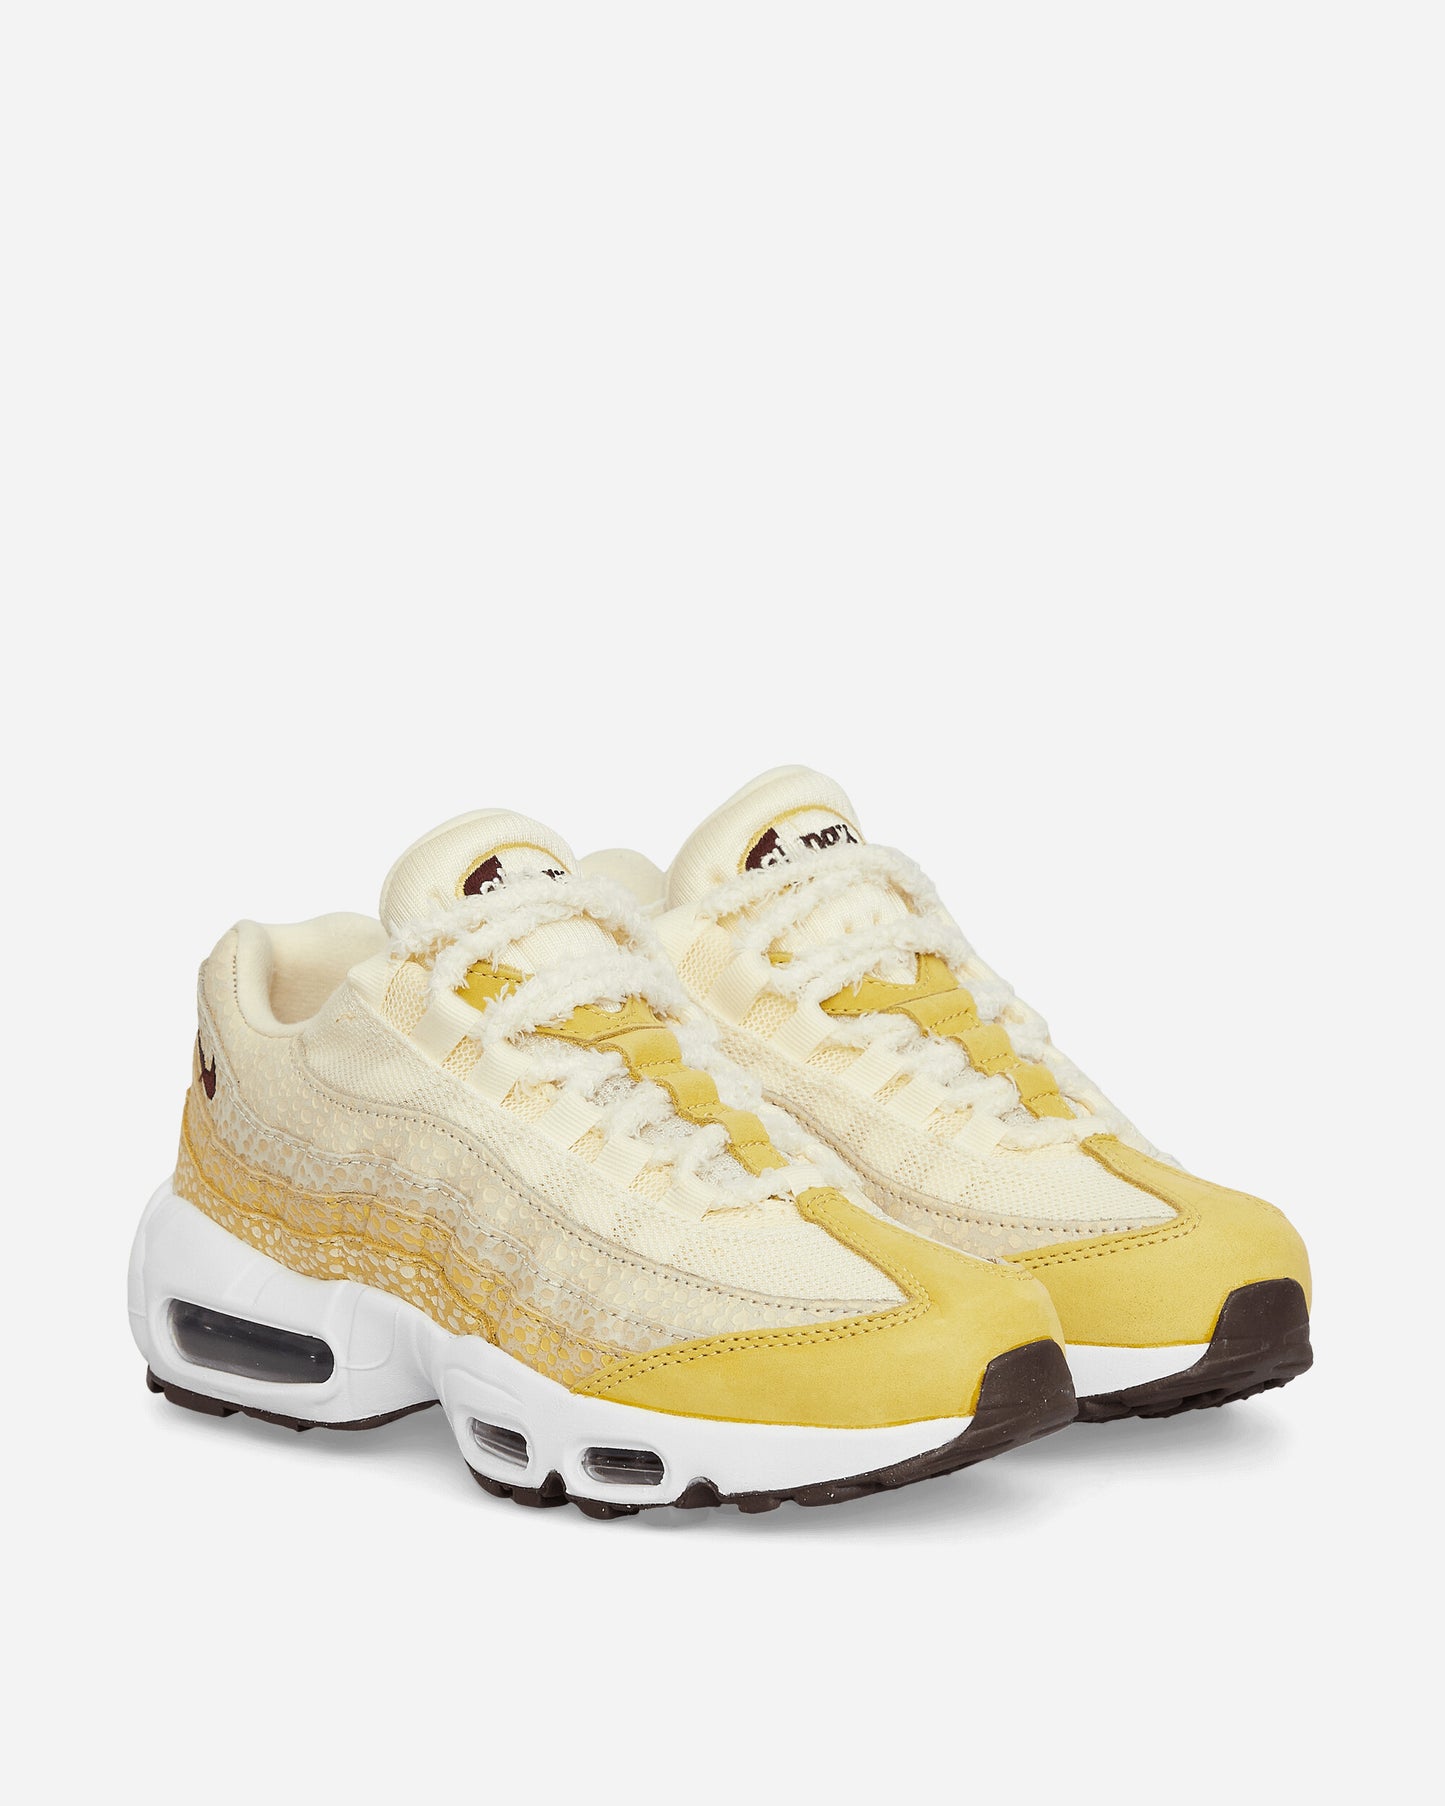 Nike Wmns Air Max 95 Alabaster/Earth Sneakers Low FD9857-700